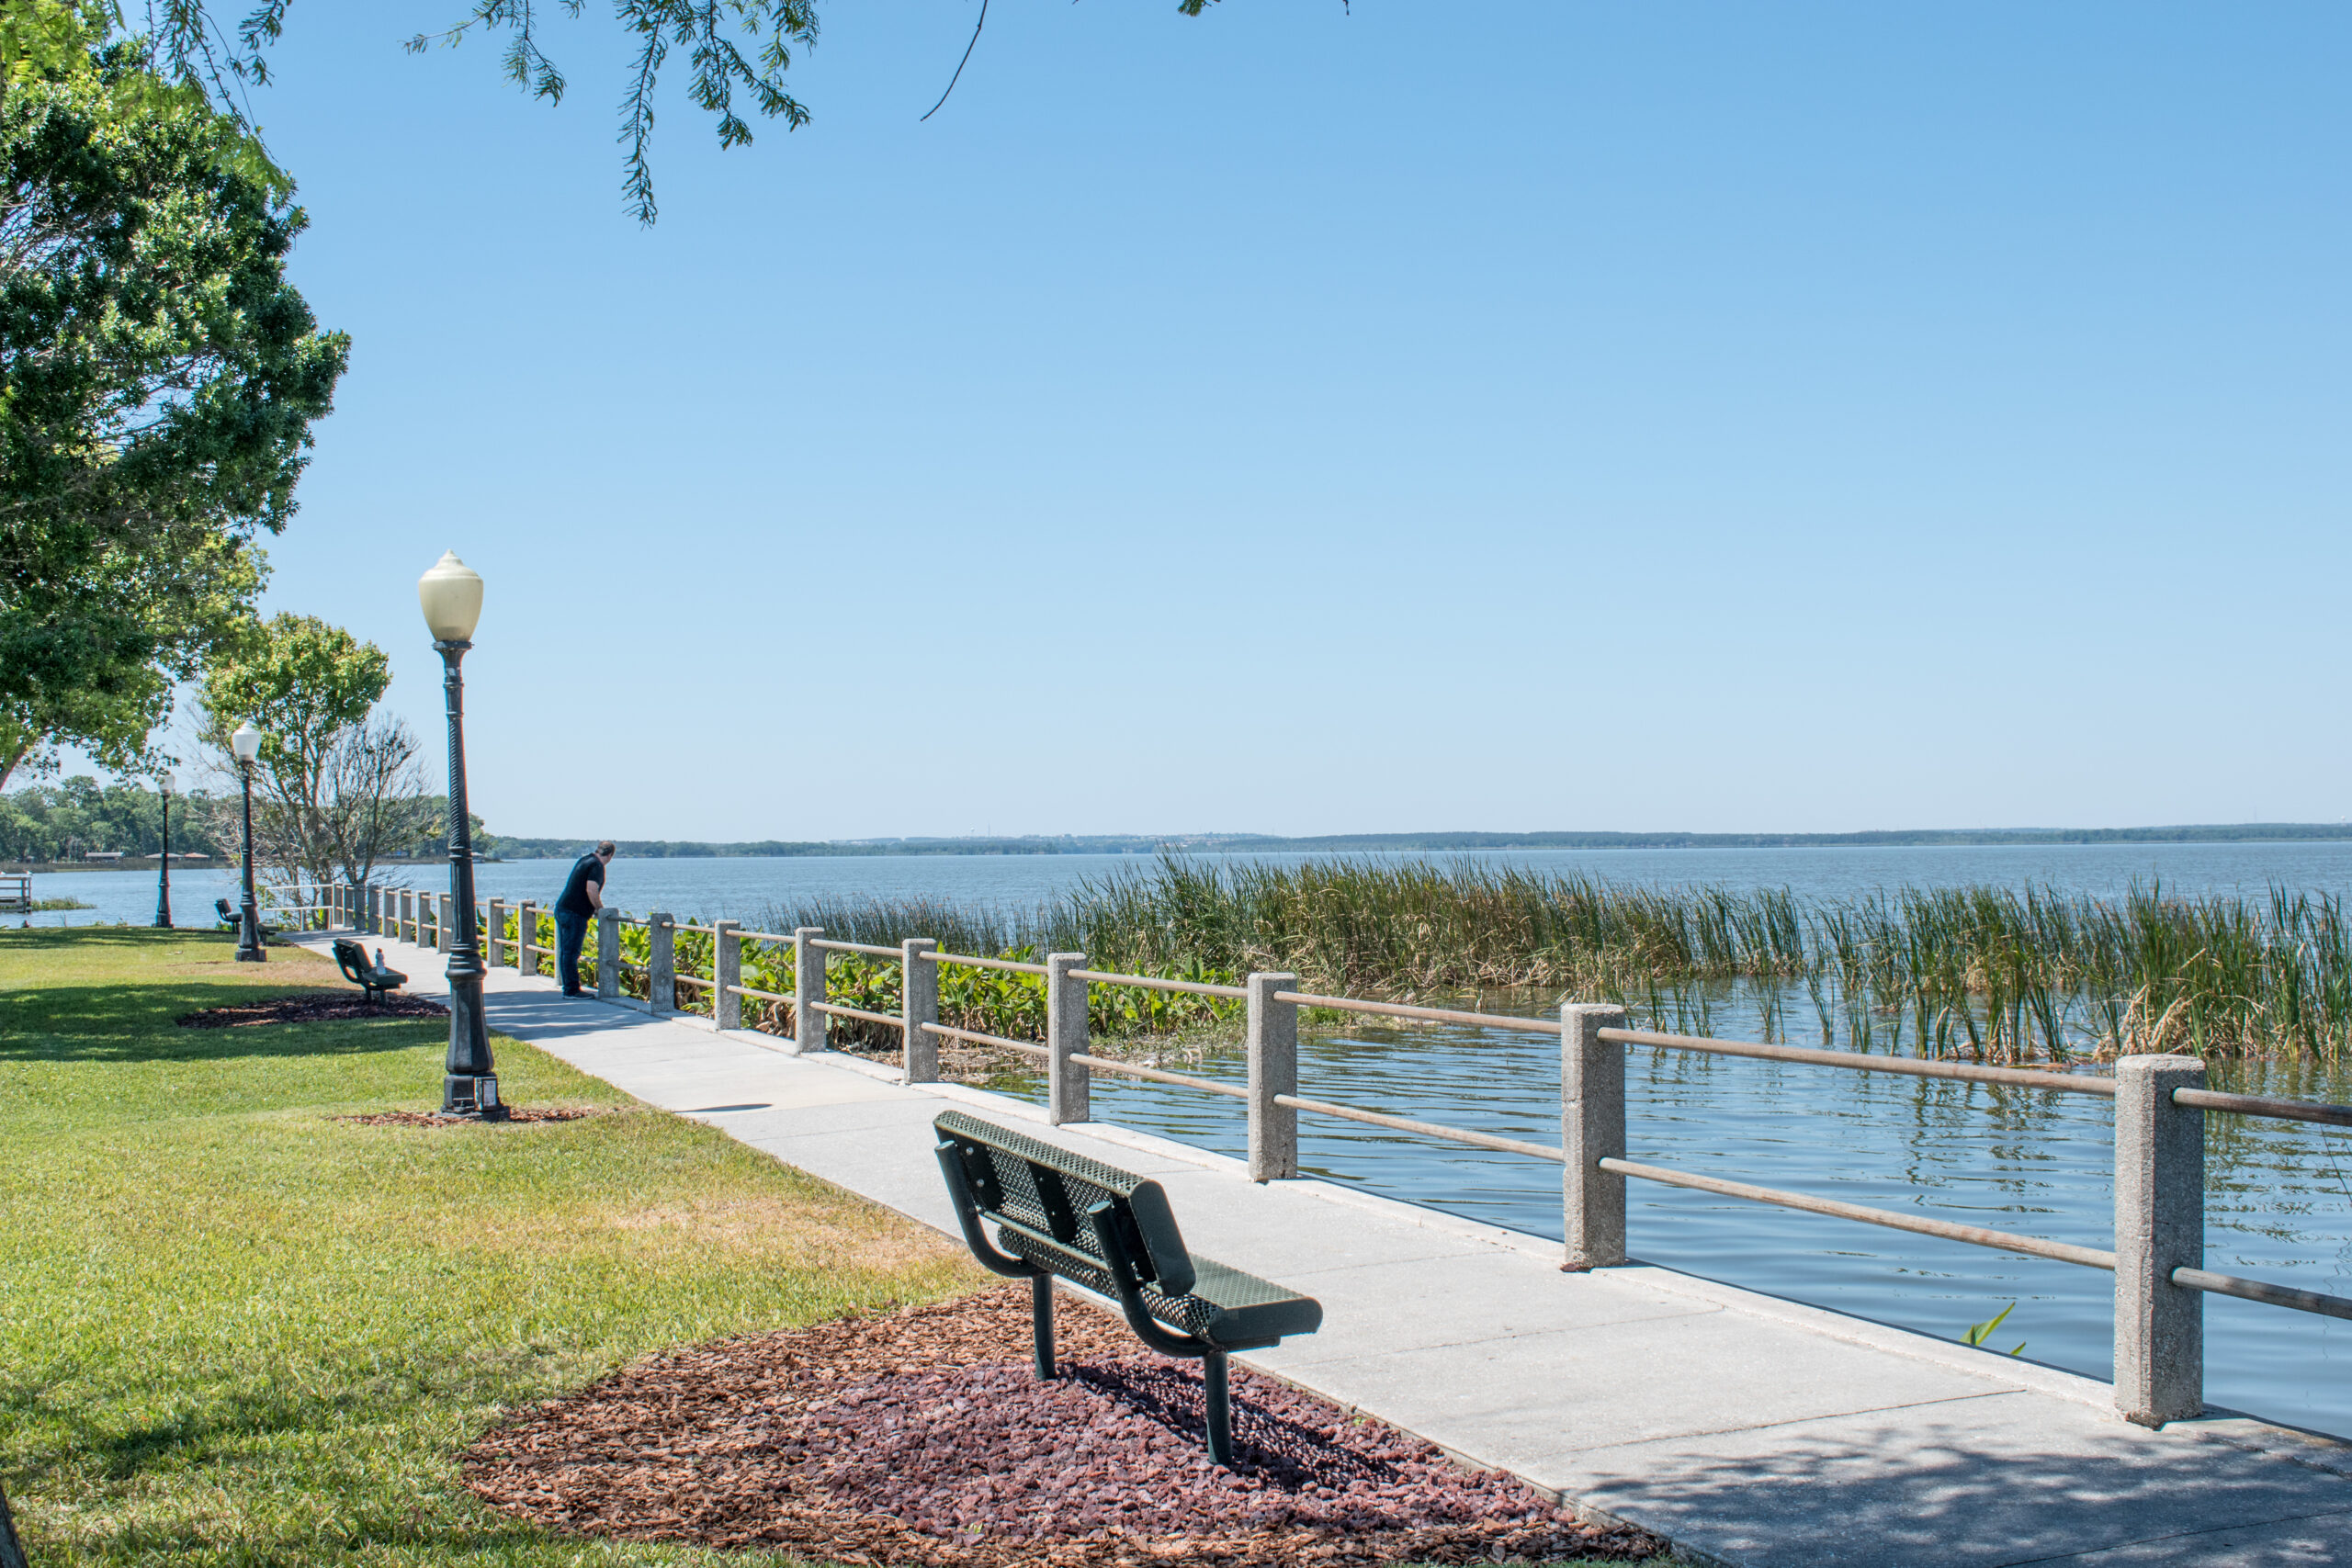 A man stands on a walking path at the edge of Lake Apopka with a clear, blue sky.